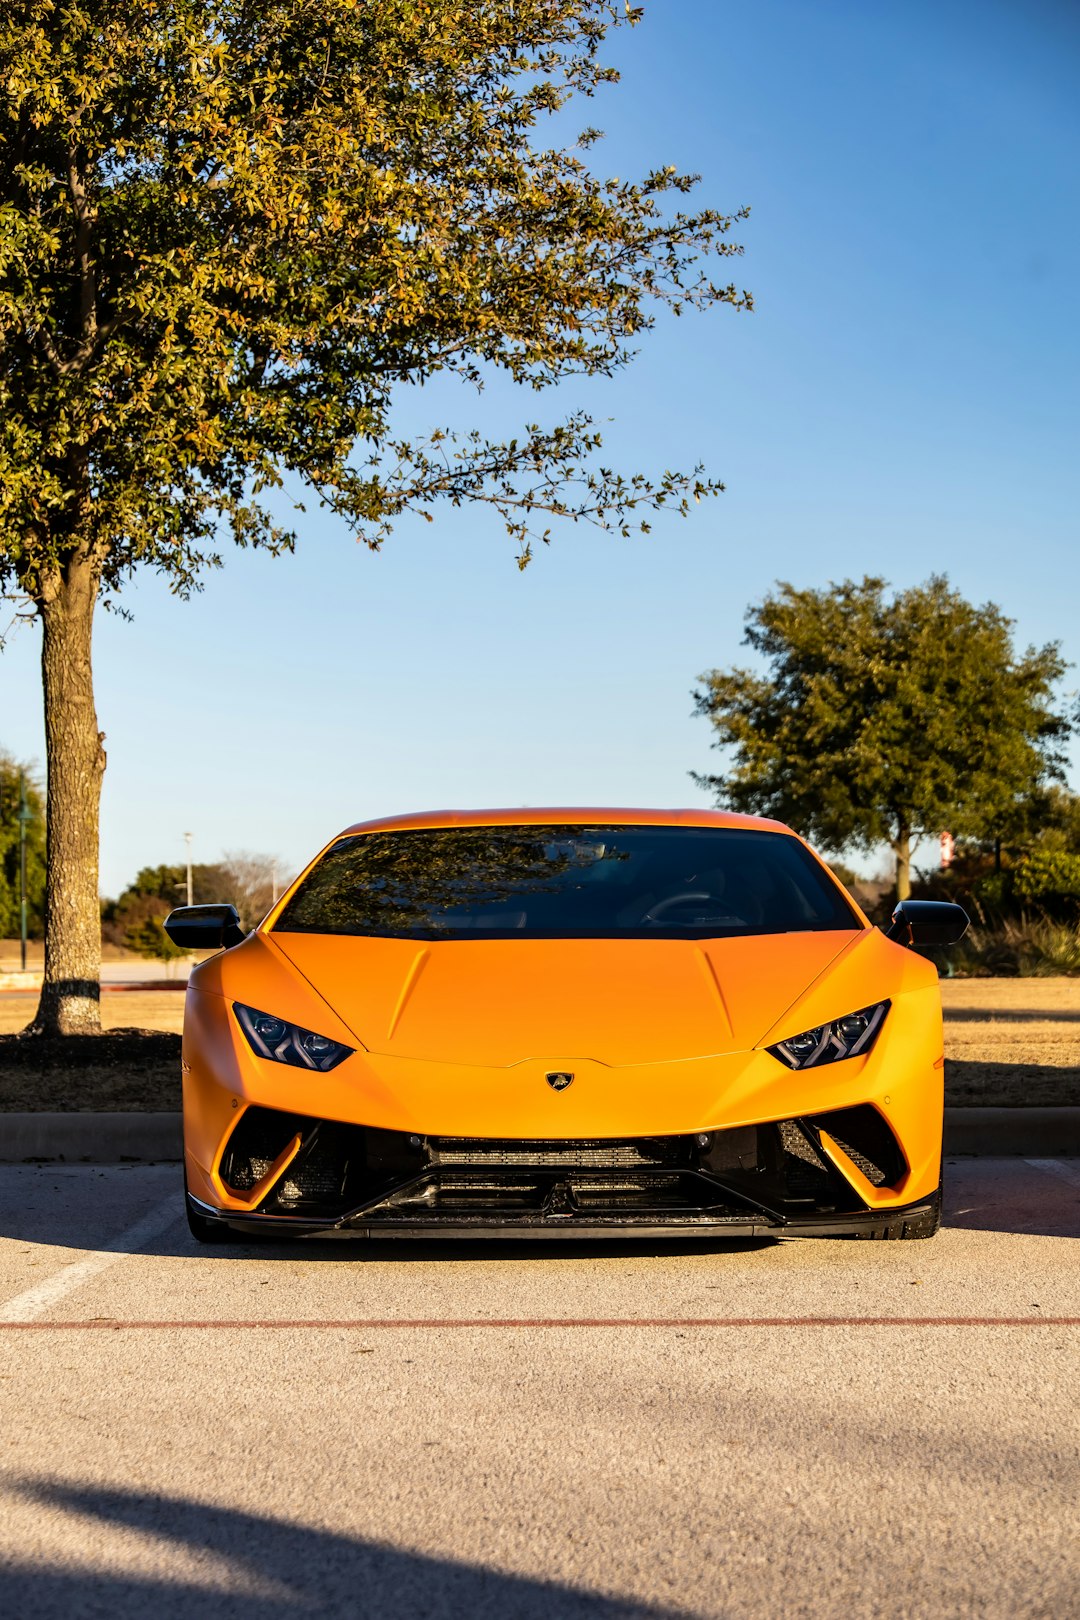 yellow lamborghini aventador parked on gray concrete road during daytime